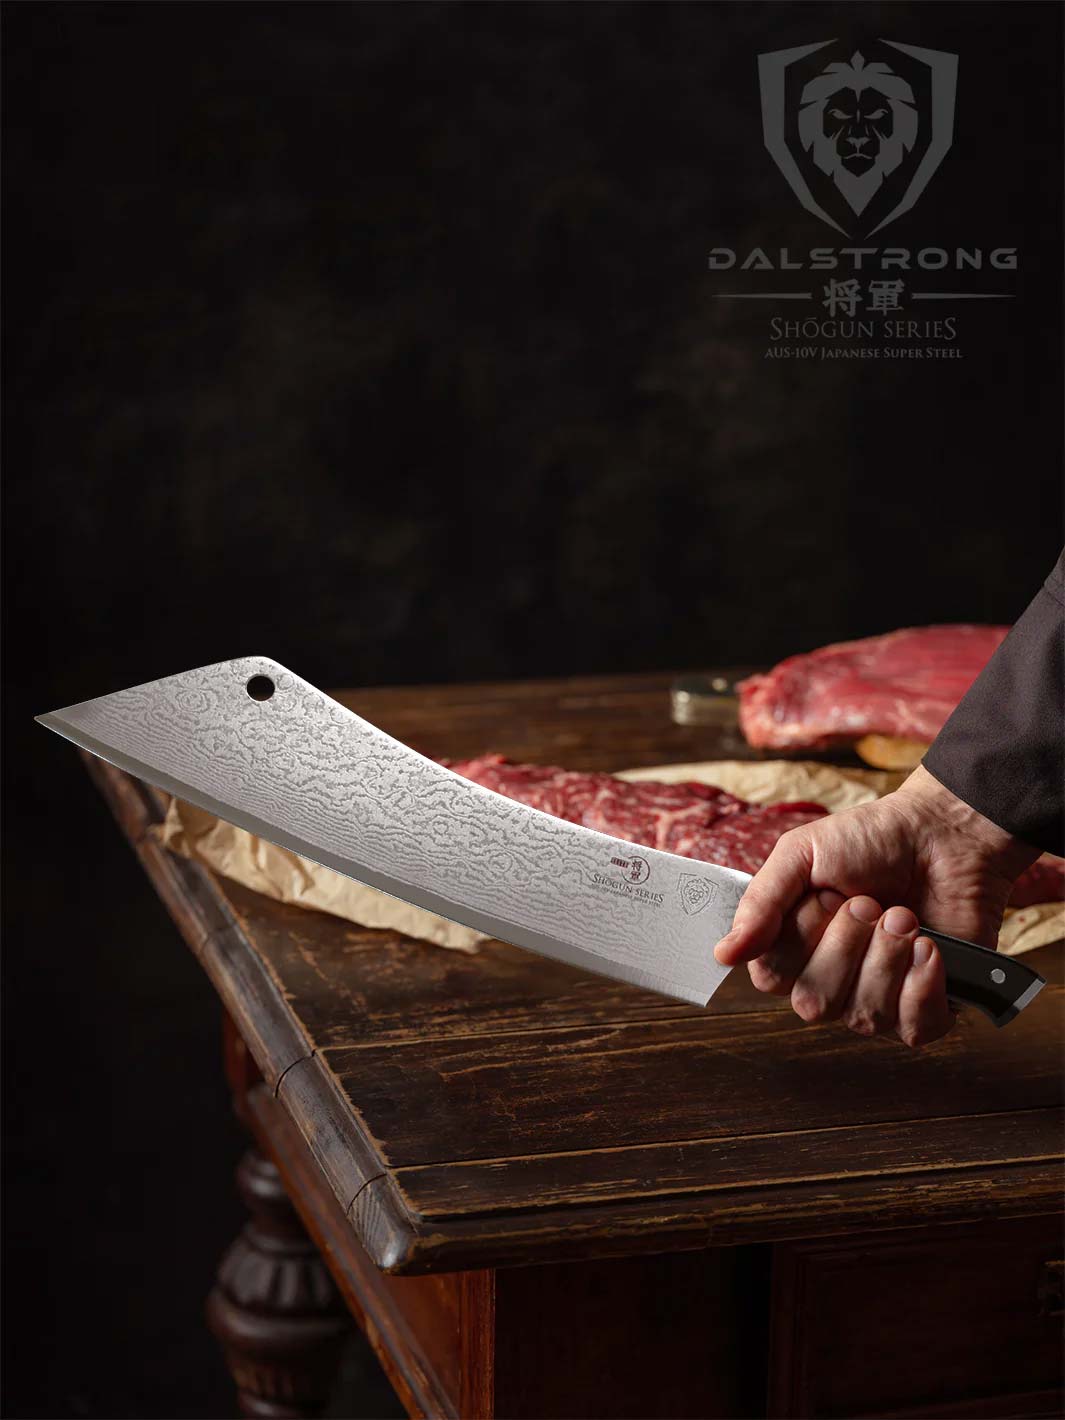 A hand holding the Dalstrong shogun series 12 inch crixus cleaver knife with black handle and a meat on a wooden table.